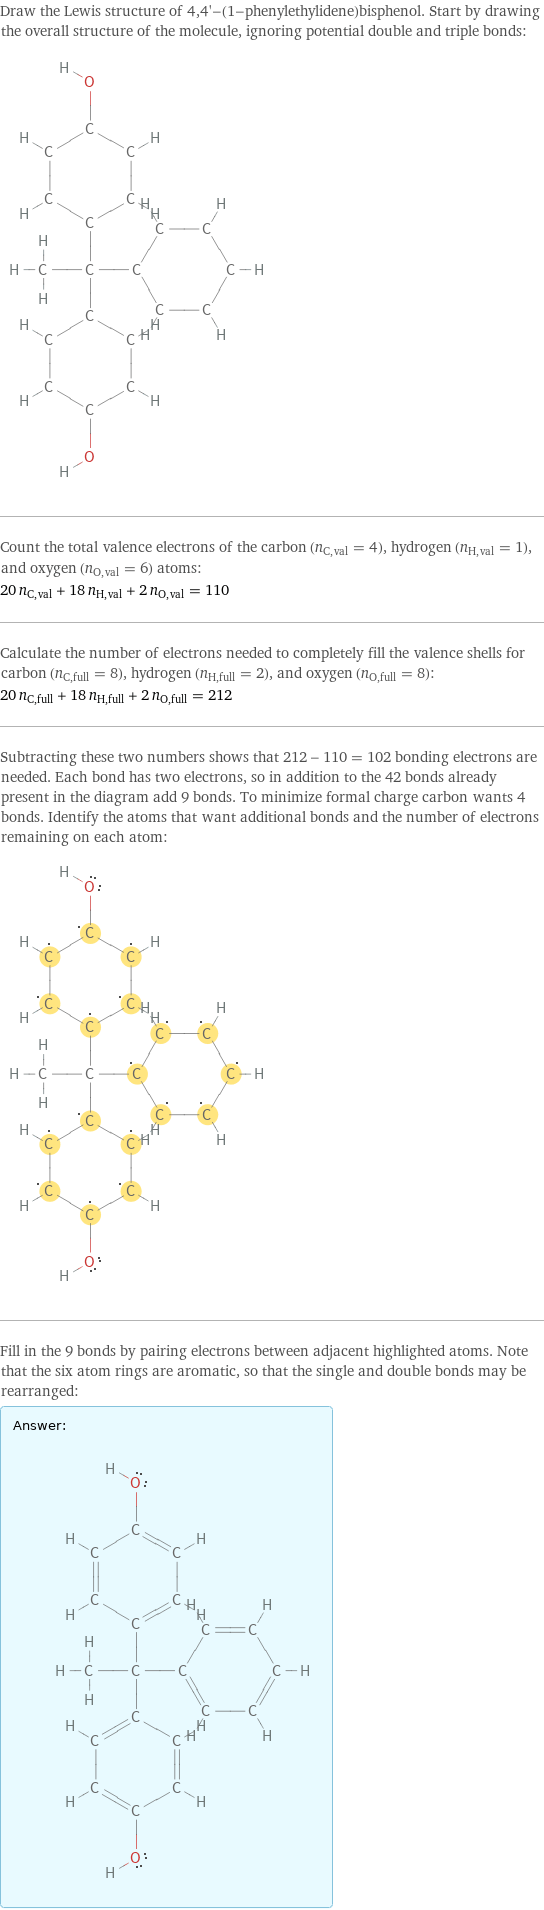 Draw the Lewis structure of 4, 4'-(1-phenylethylidene)bisphenol. Start by drawing the overall structure of the molecule, ignoring potential double and triple bonds:  Count the total valence electrons of the carbon (n_C, val = 4), hydrogen (n_H, val = 1), and oxygen (n_O, val = 6) atoms: 20 n_C, val + 18 n_H, val + 2 n_O, val = 110 Calculate the number of electrons needed to completely fill the valence shells for carbon (n_C, full = 8), hydrogen (n_H, full = 2), and oxygen (n_O, full = 8): 20 n_C, full + 18 n_H, full + 2 n_O, full = 212 Subtracting these two numbers shows that 212 - 110 = 102 bonding electrons are needed. Each bond has two electrons, so in addition to the 42 bonds already present in the diagram add 9 bonds. To minimize formal charge carbon wants 4 bonds. Identify the atoms that want additional bonds and the number of electrons remaining on each atom:  Fill in the 9 bonds by pairing electrons between adjacent highlighted atoms. Note that the six atom rings are aromatic, so that the single and double bonds may be rearranged: Answer: |   | 